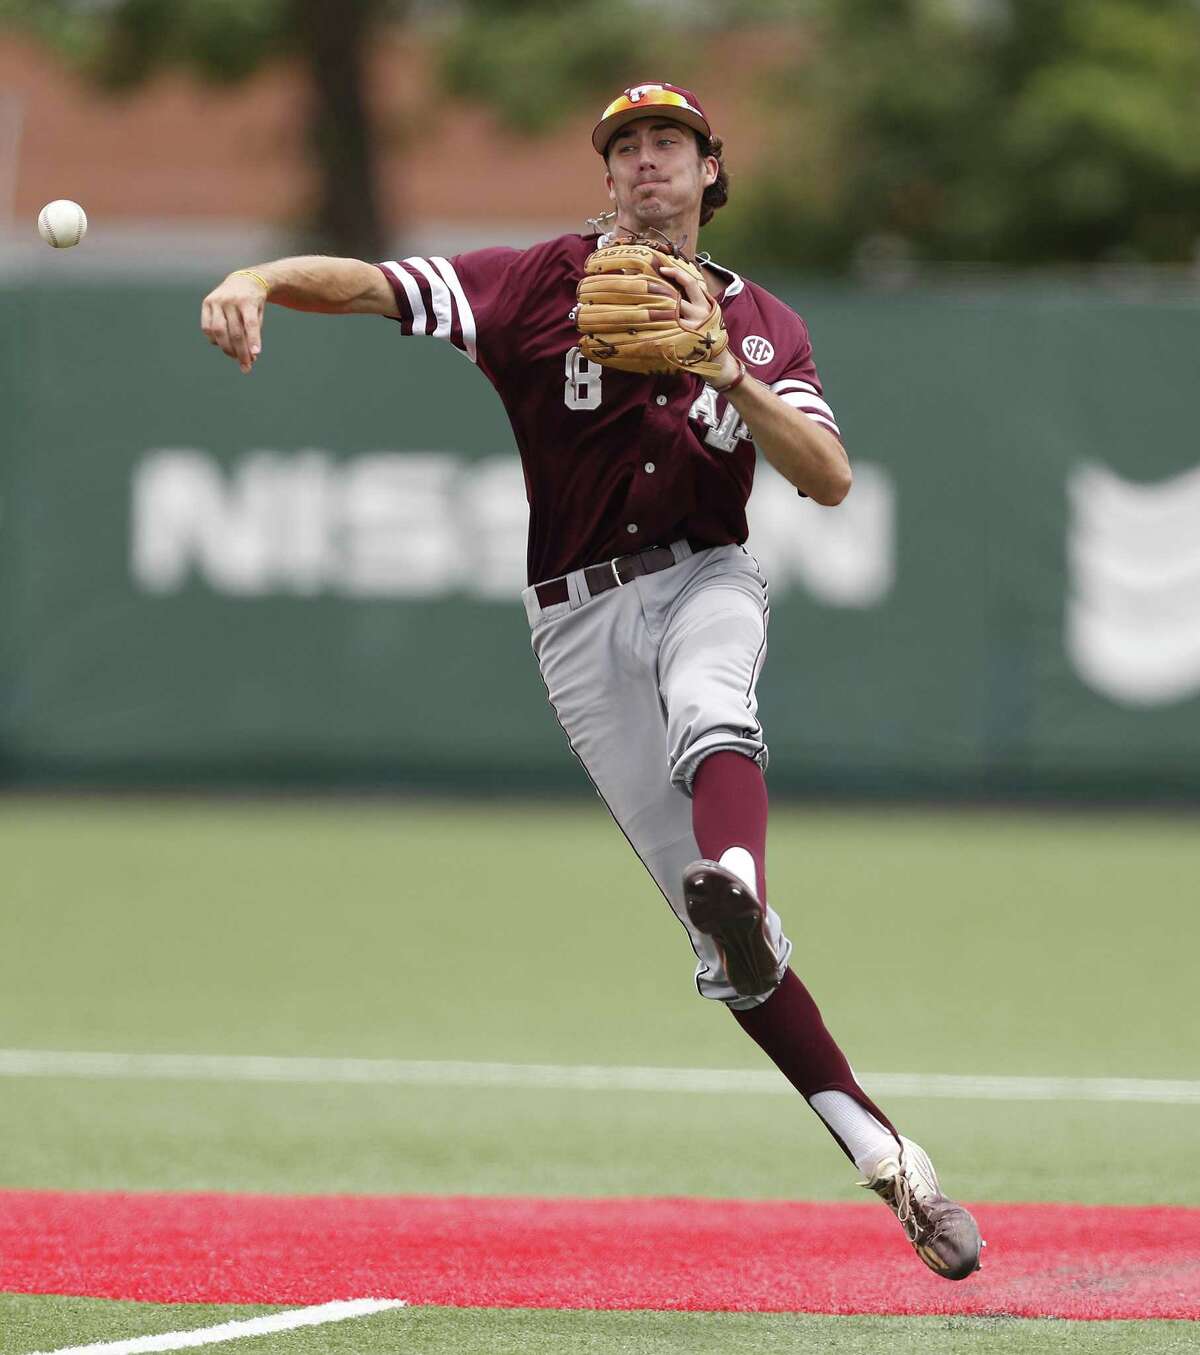 Texas A&M infielder Braden Shewmake makes the throw to first base during the second inning against Houston in an NCAA regional baseball game at Schroeder Park, in Houston on June, 5, 2017.